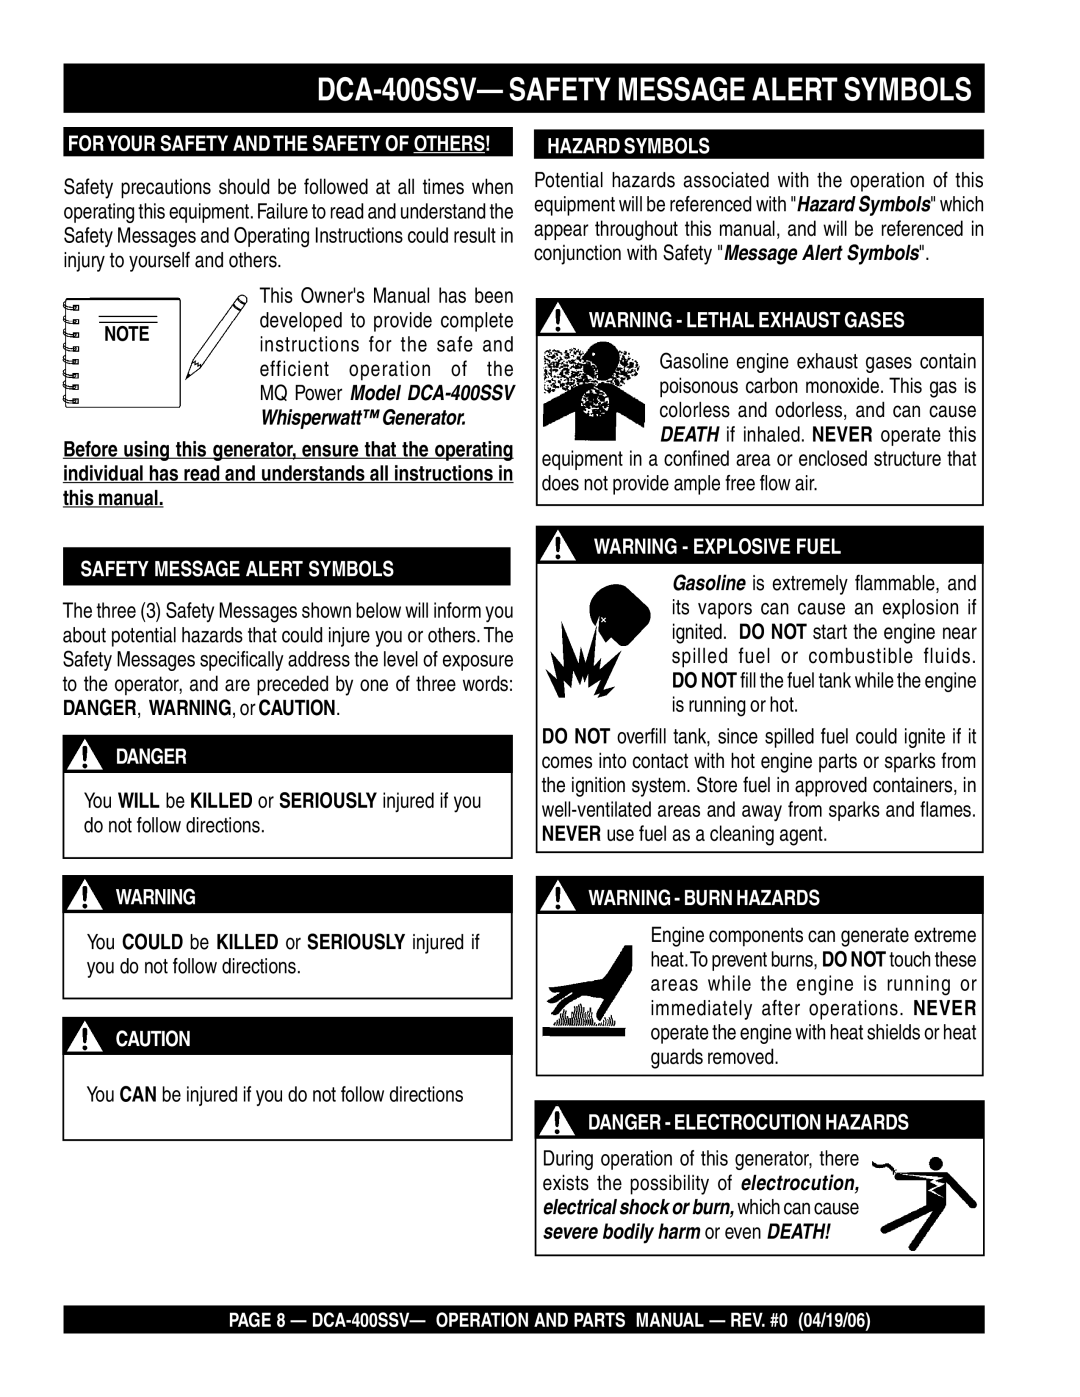 Multiquip operation manual DCA-400SSV- Safety Message Alert Symbols, You can be injured if you do not follow directions 